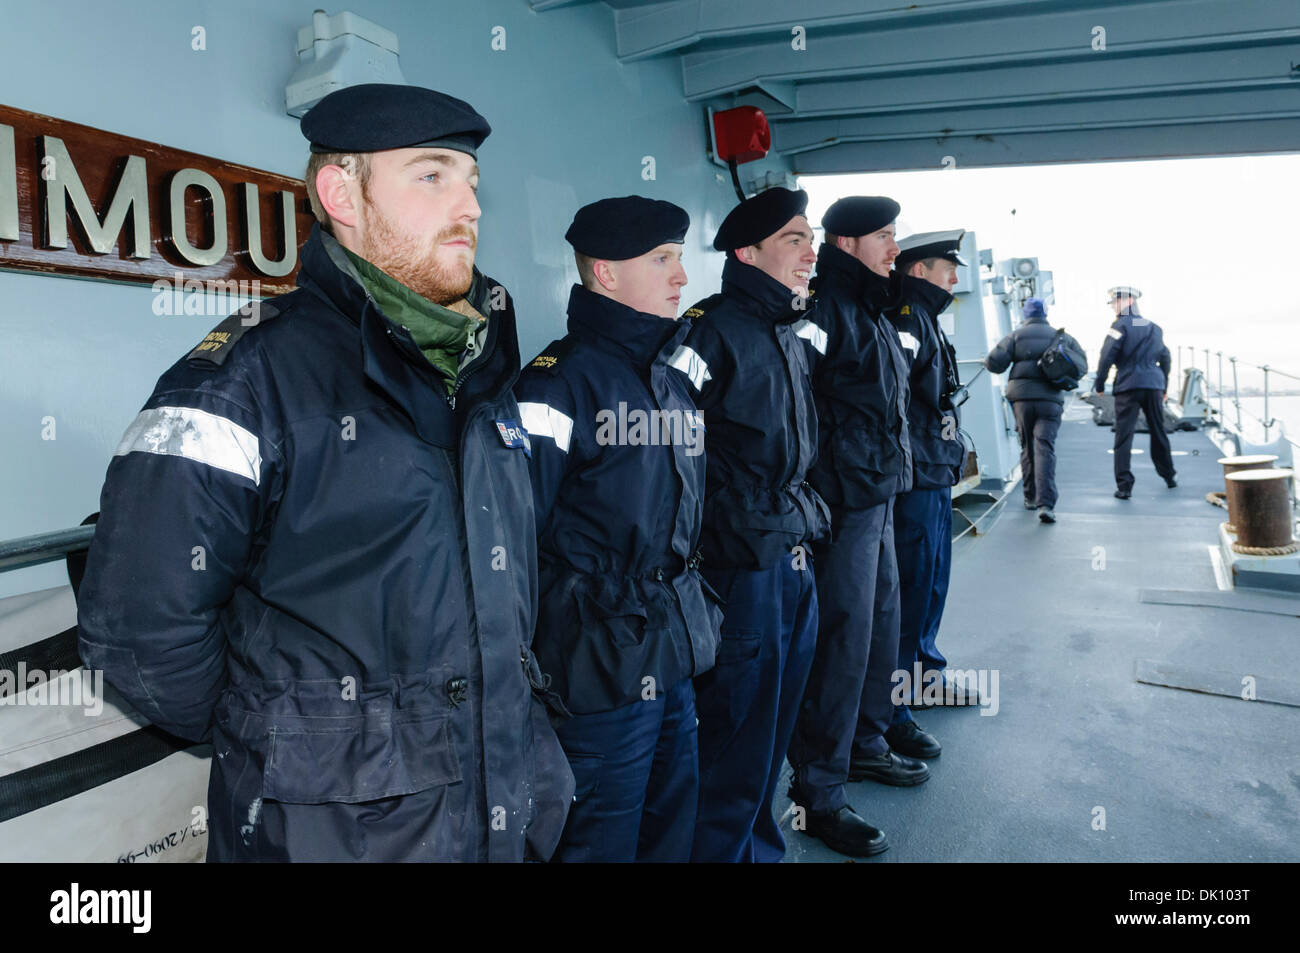 Belfast, Northern Ireland. 30th Nov 2013 - Sailors on HMS Monmouth, a Royal Navy type 23 Frigate, line up as the ship is about to berth. Credit:  Stephen Barnes/Alamy Live News Stock Photo